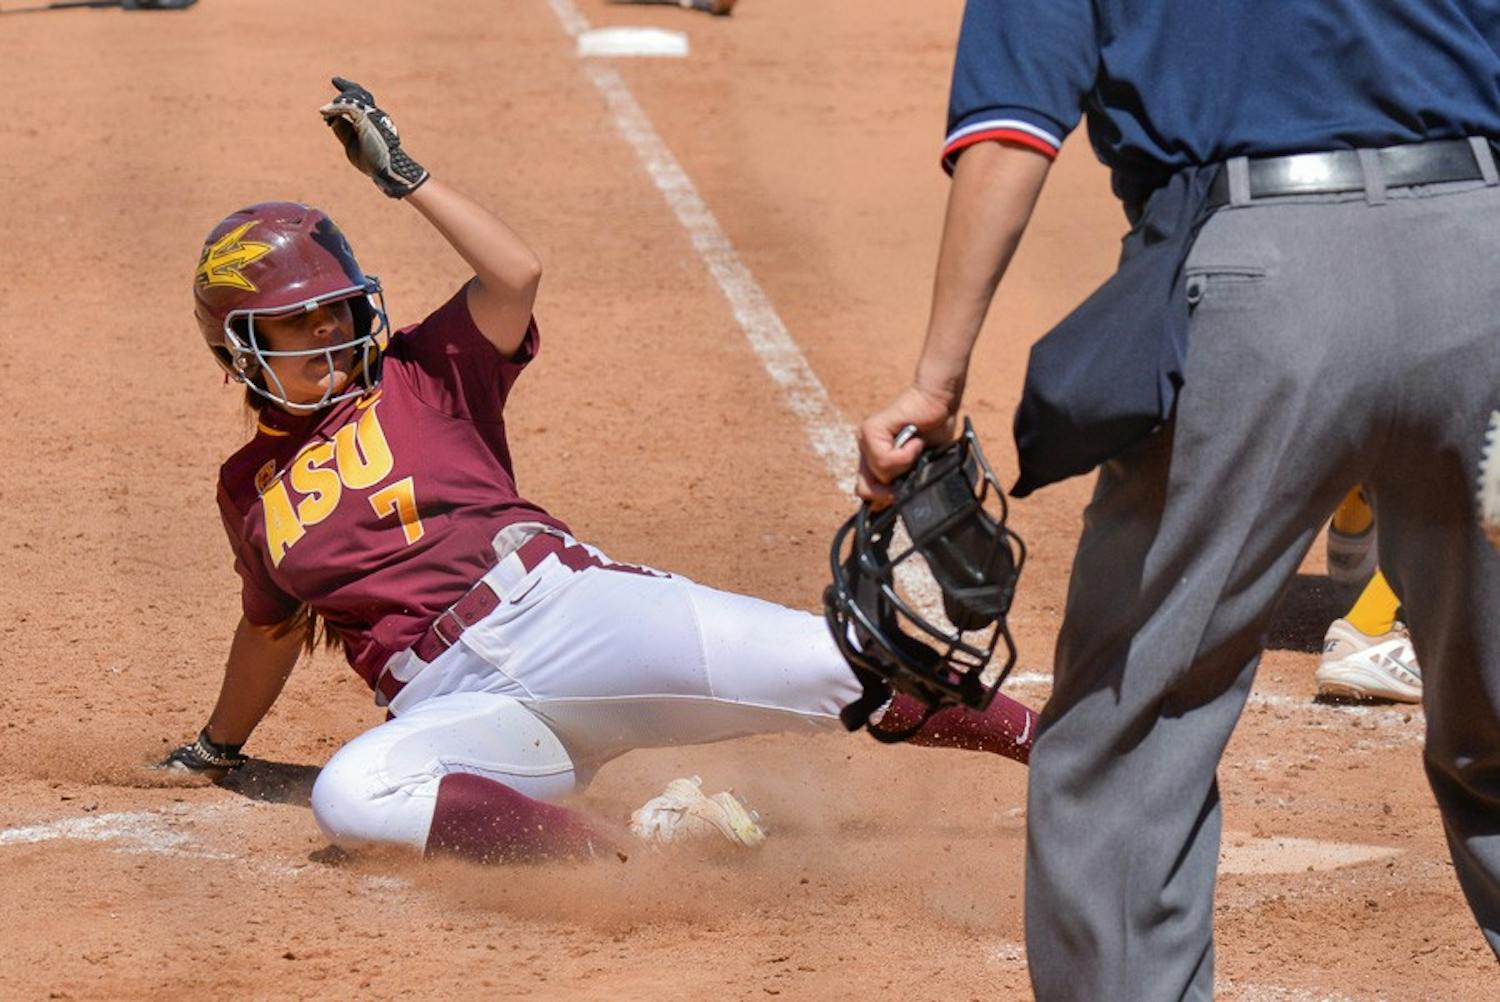 Senior outfielder Sierra Rodriguez slides safely into home plate for another Sun Devil run on Sunday, March 22, 2015, at Farrington Stadium as the ASU Sun Devils faced off with the California Bears. (J. Bauer-Leffler/ The State Press)